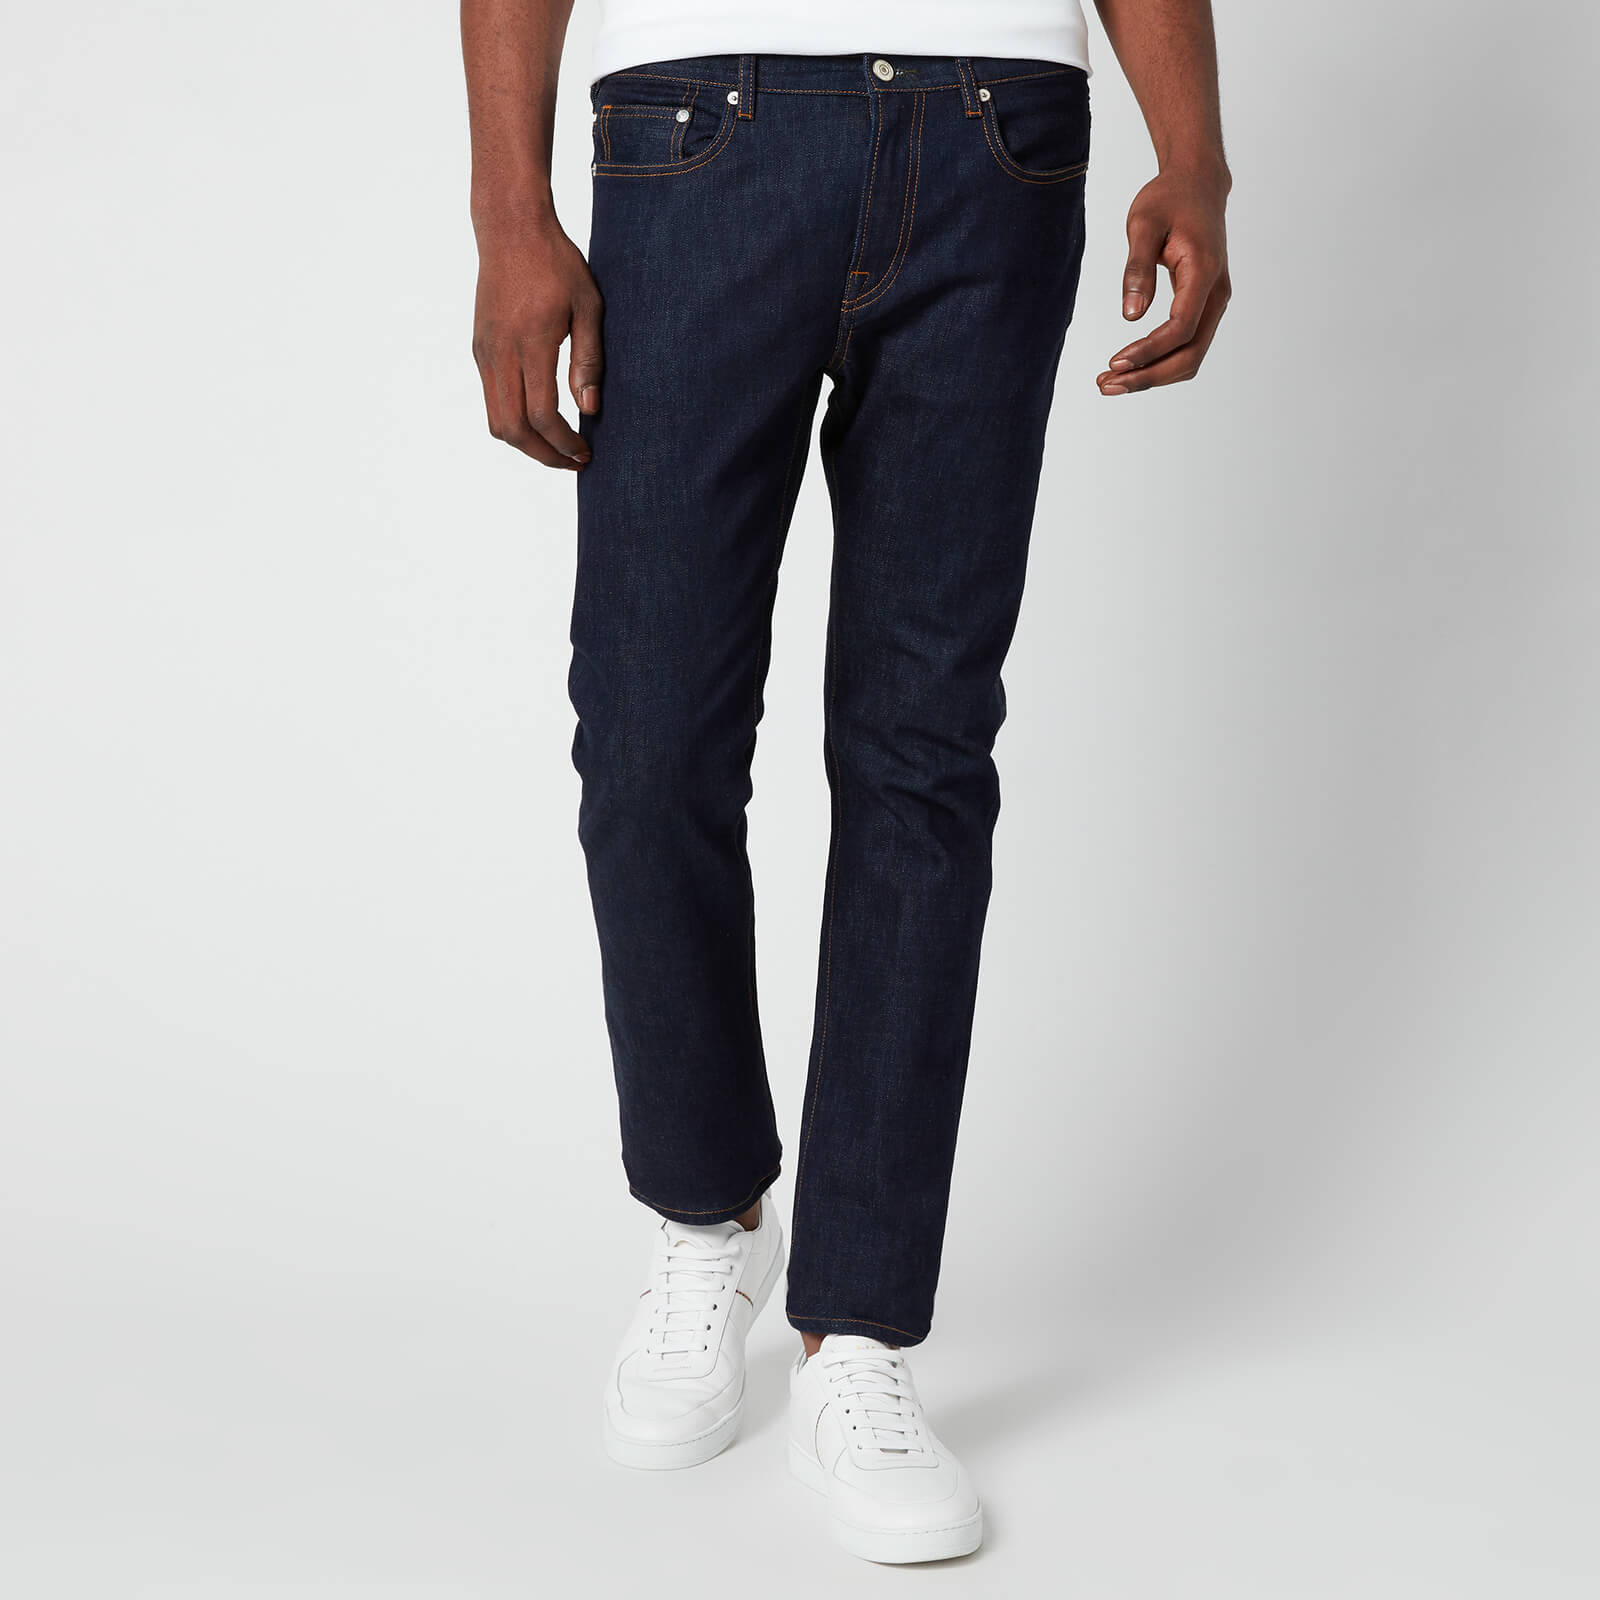 paul smith jeans men s paul smith jeans | 16 offers starting from ...